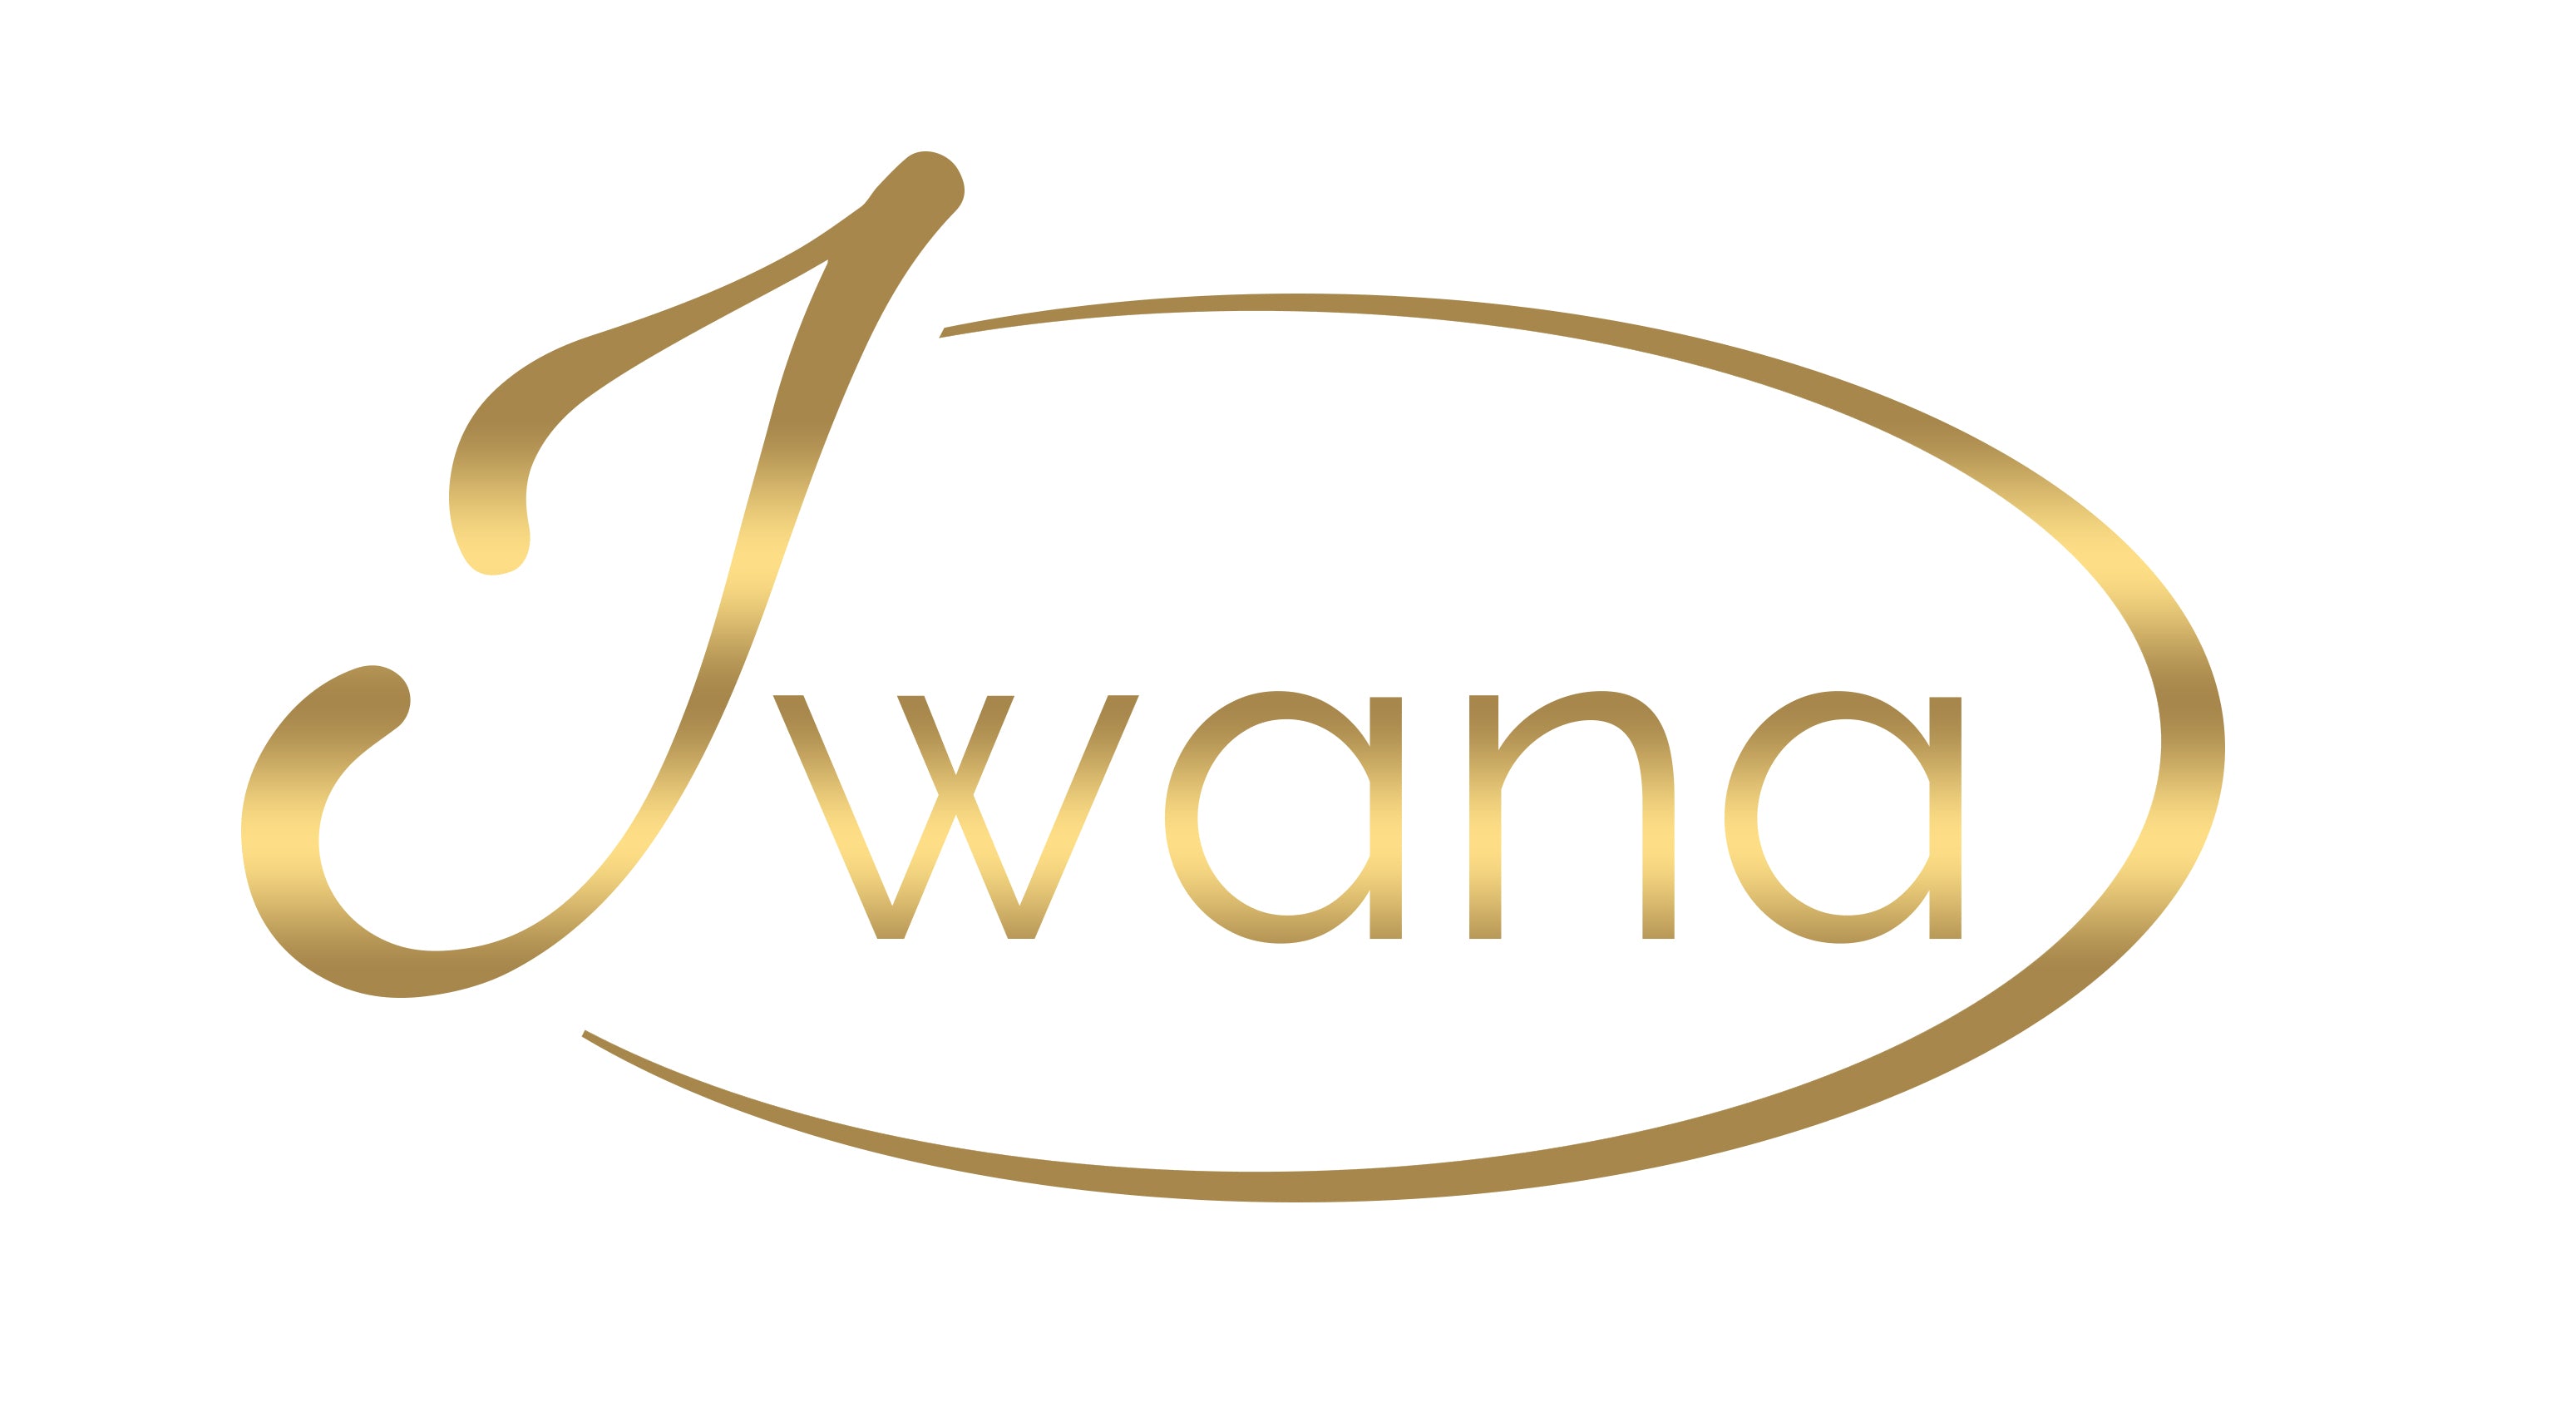 Natural ingredients are better for your skin, Jwana Beauty